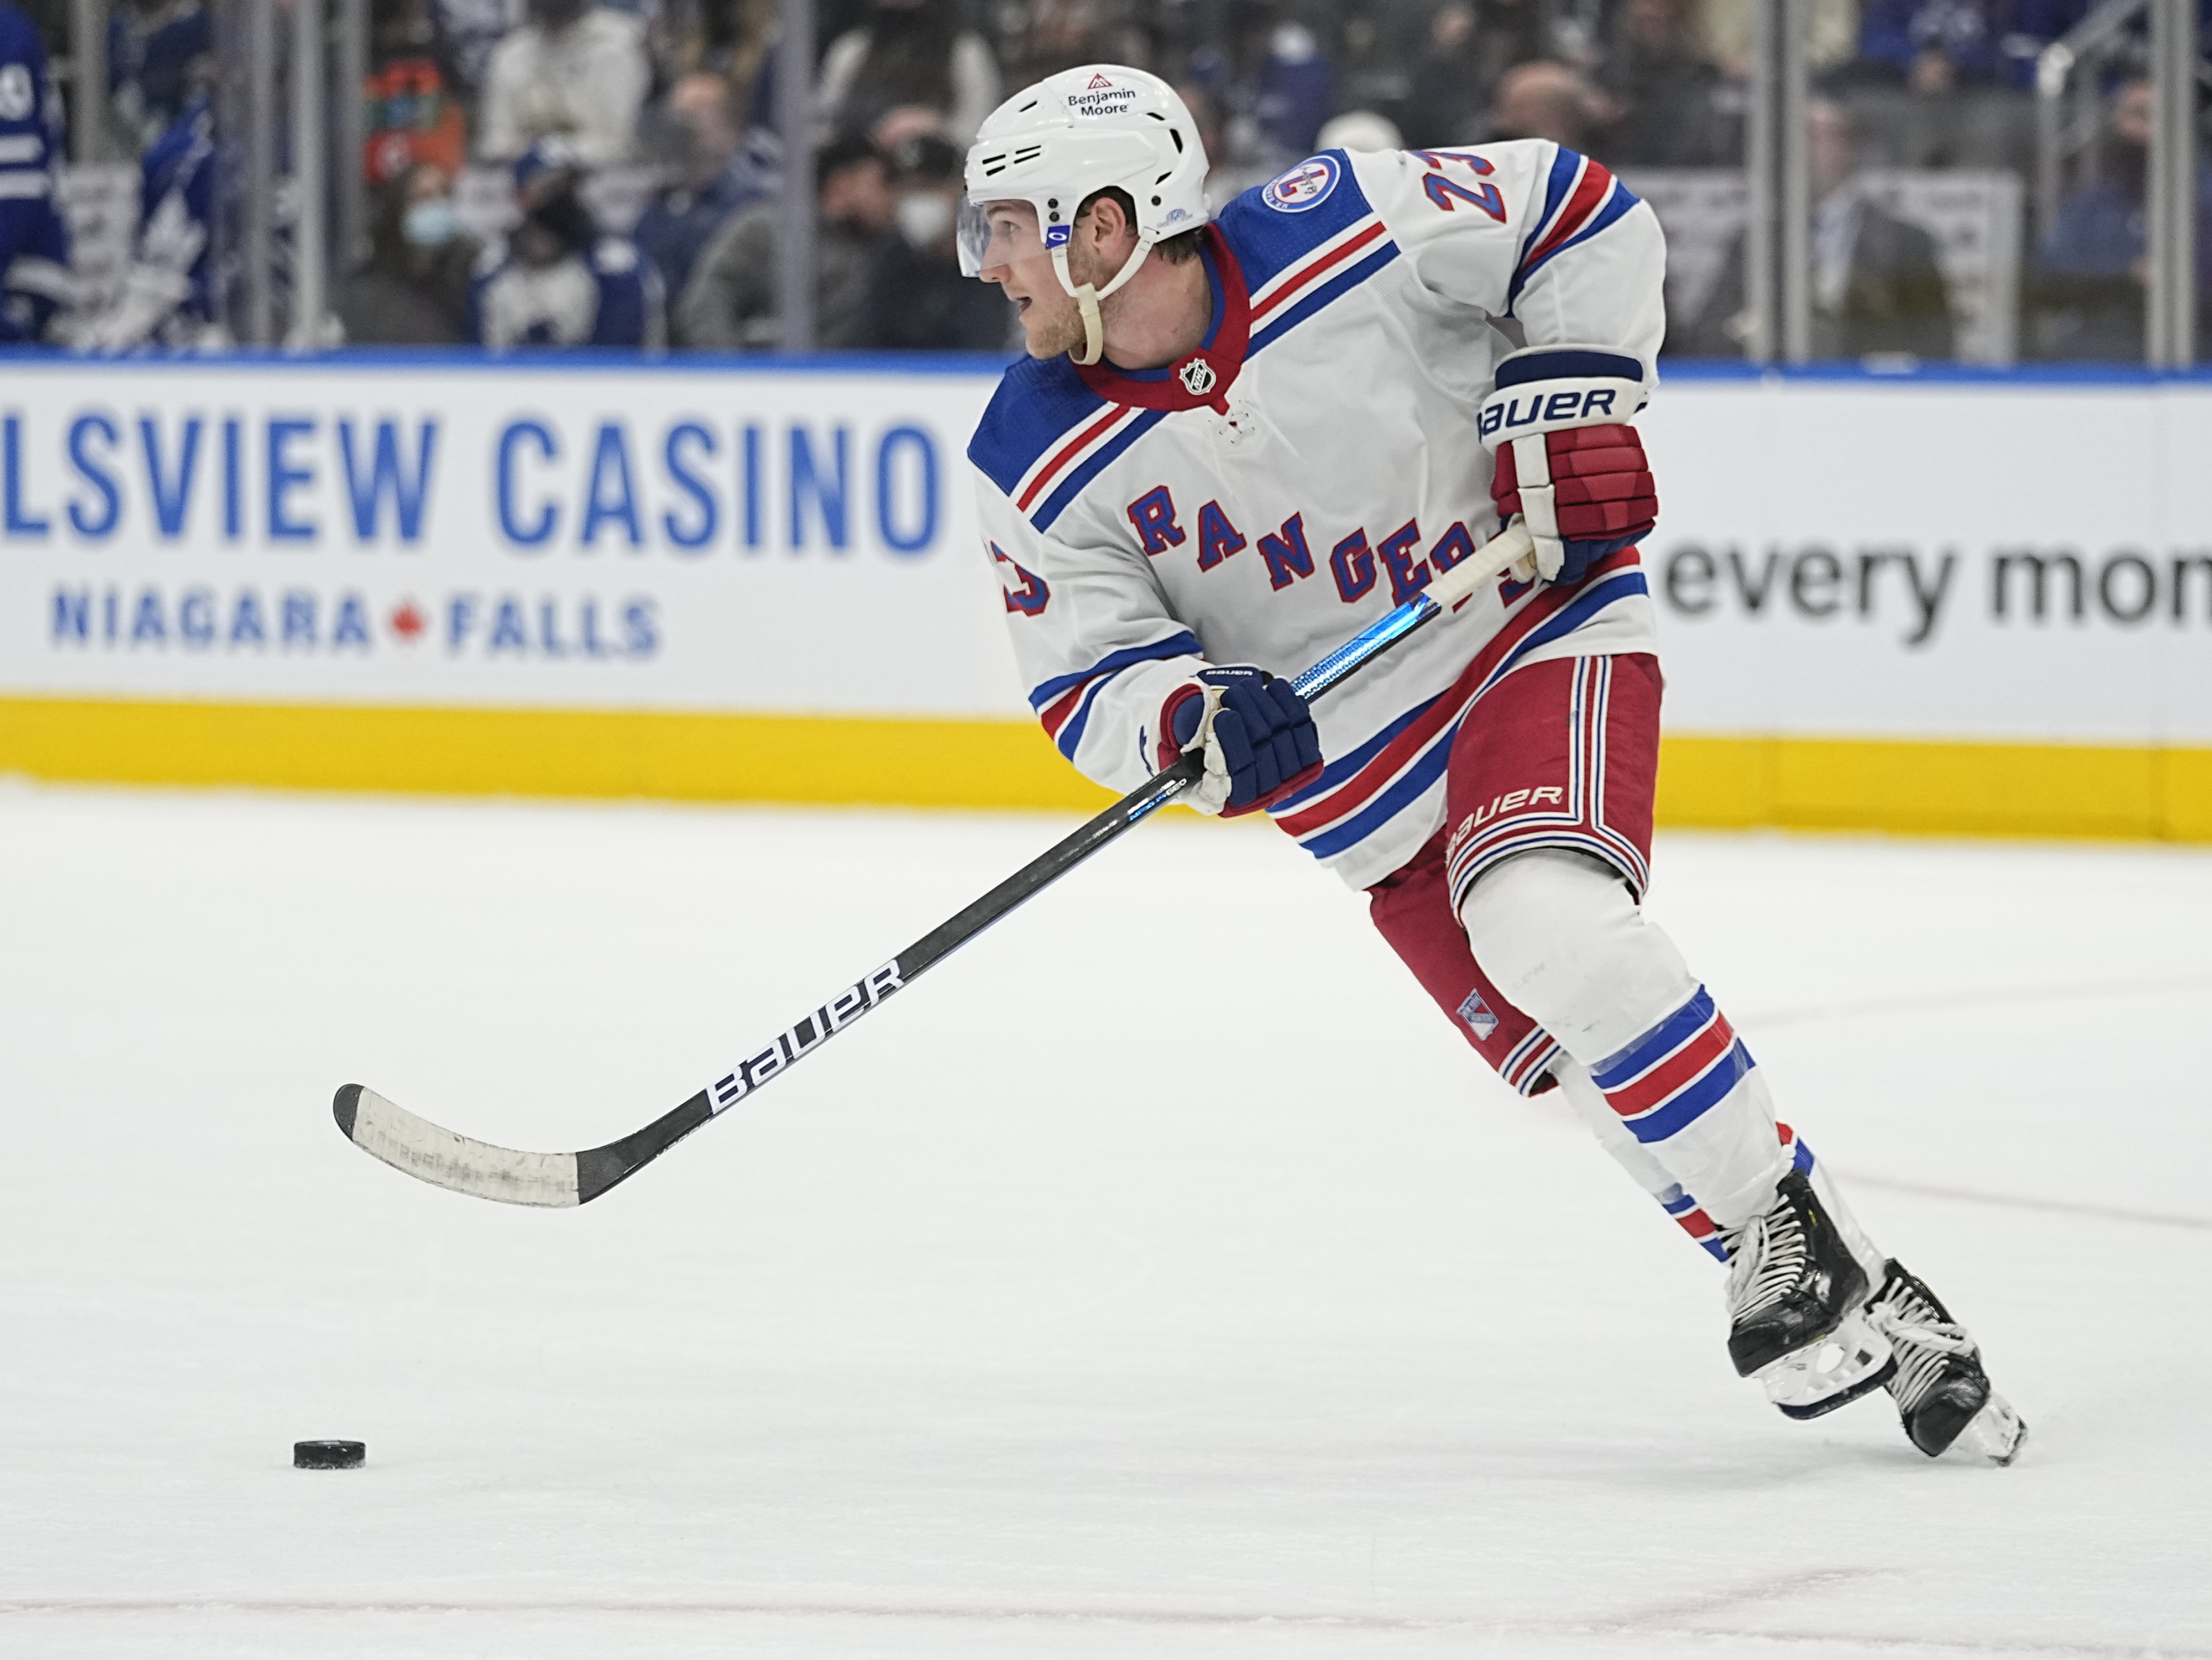 New York Rangers: Adam Fox signs entry level contract